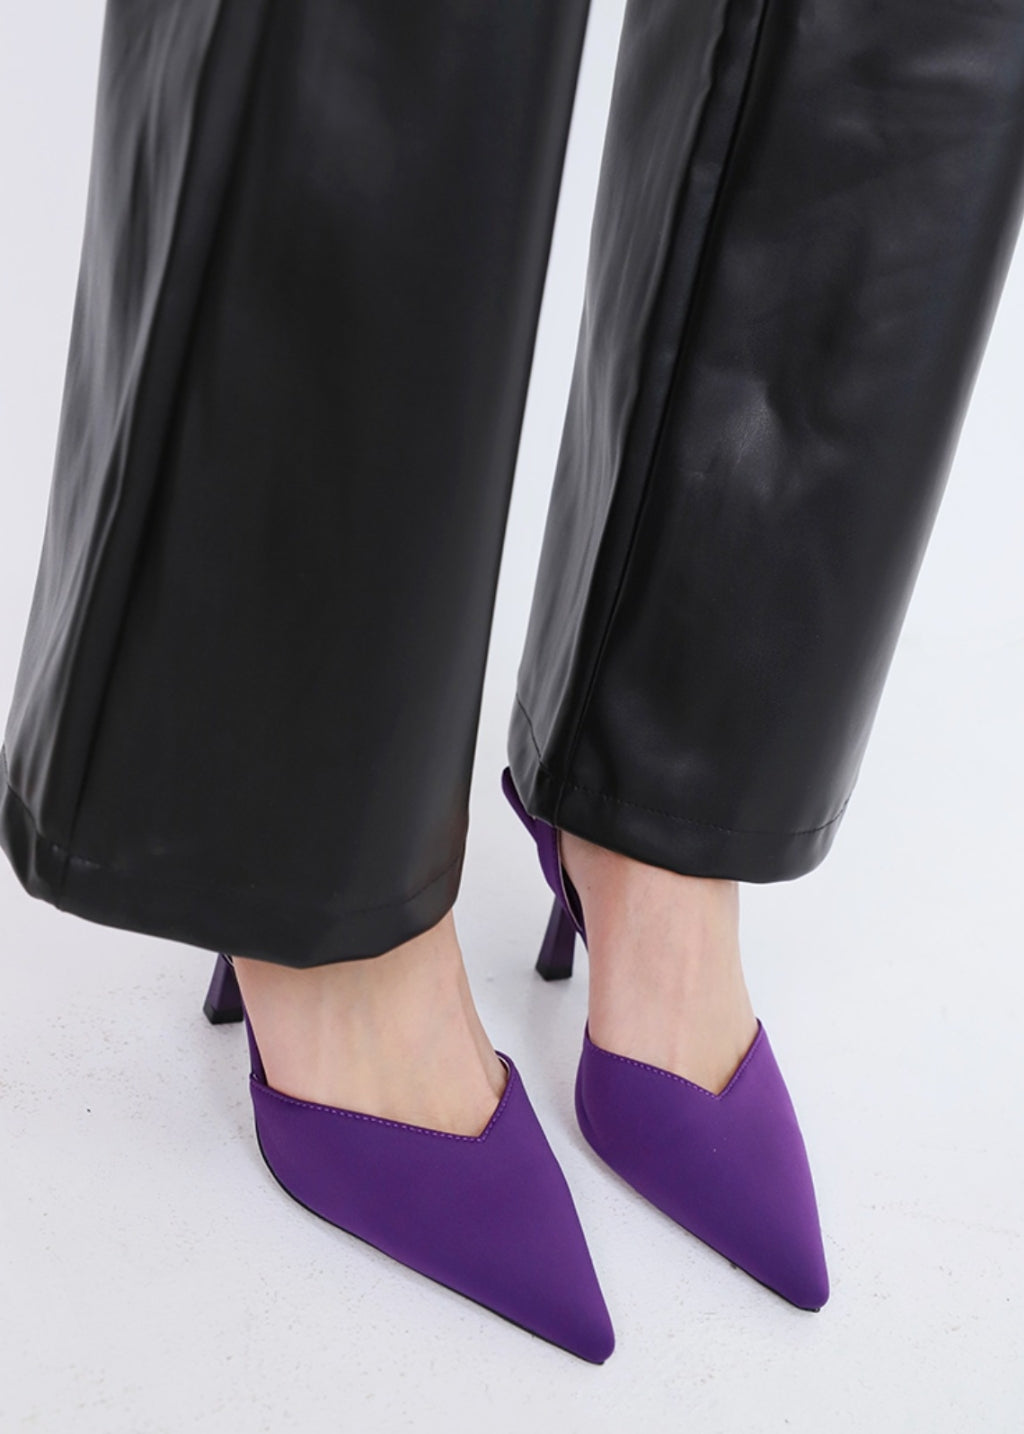 Deep V Mouth Pointed -Toe Temperament Slingback High Heels